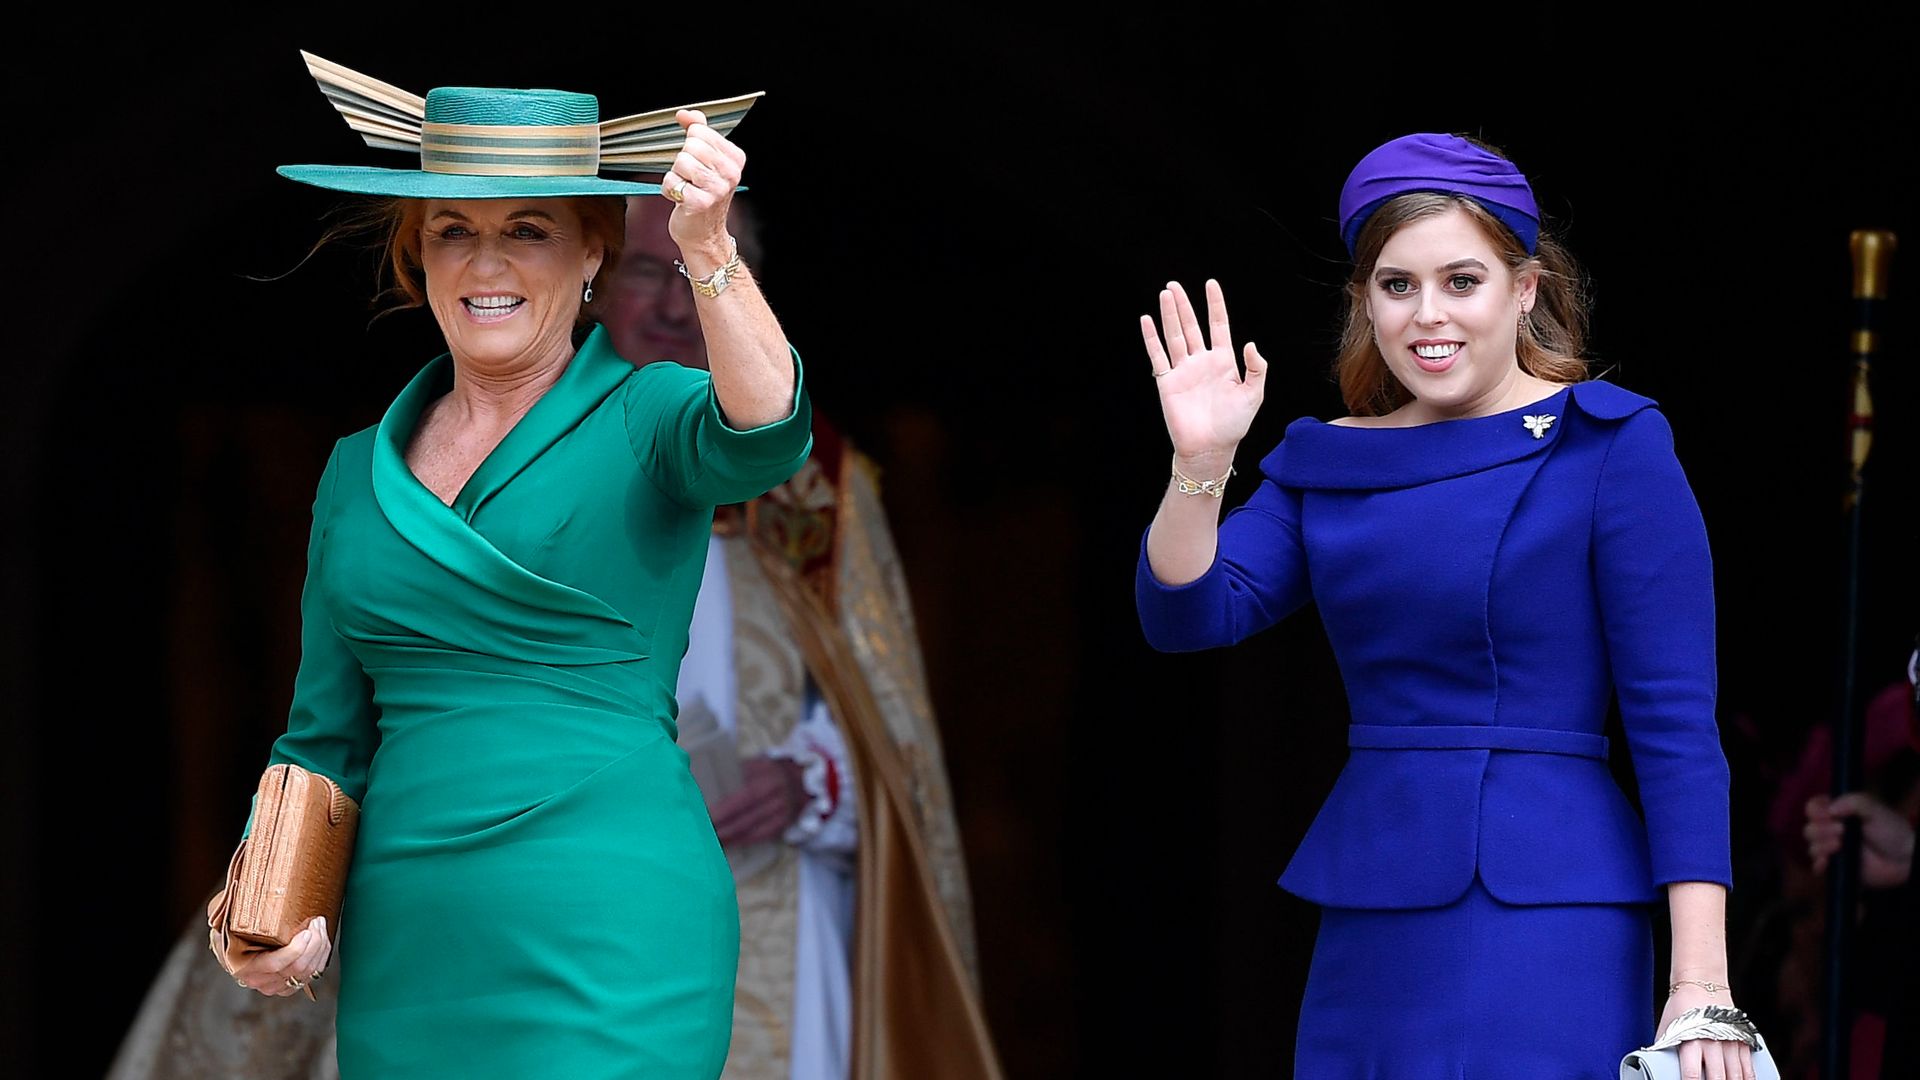 Duchess of York 'doing well' after double cancer scare, Princess Beatrice says